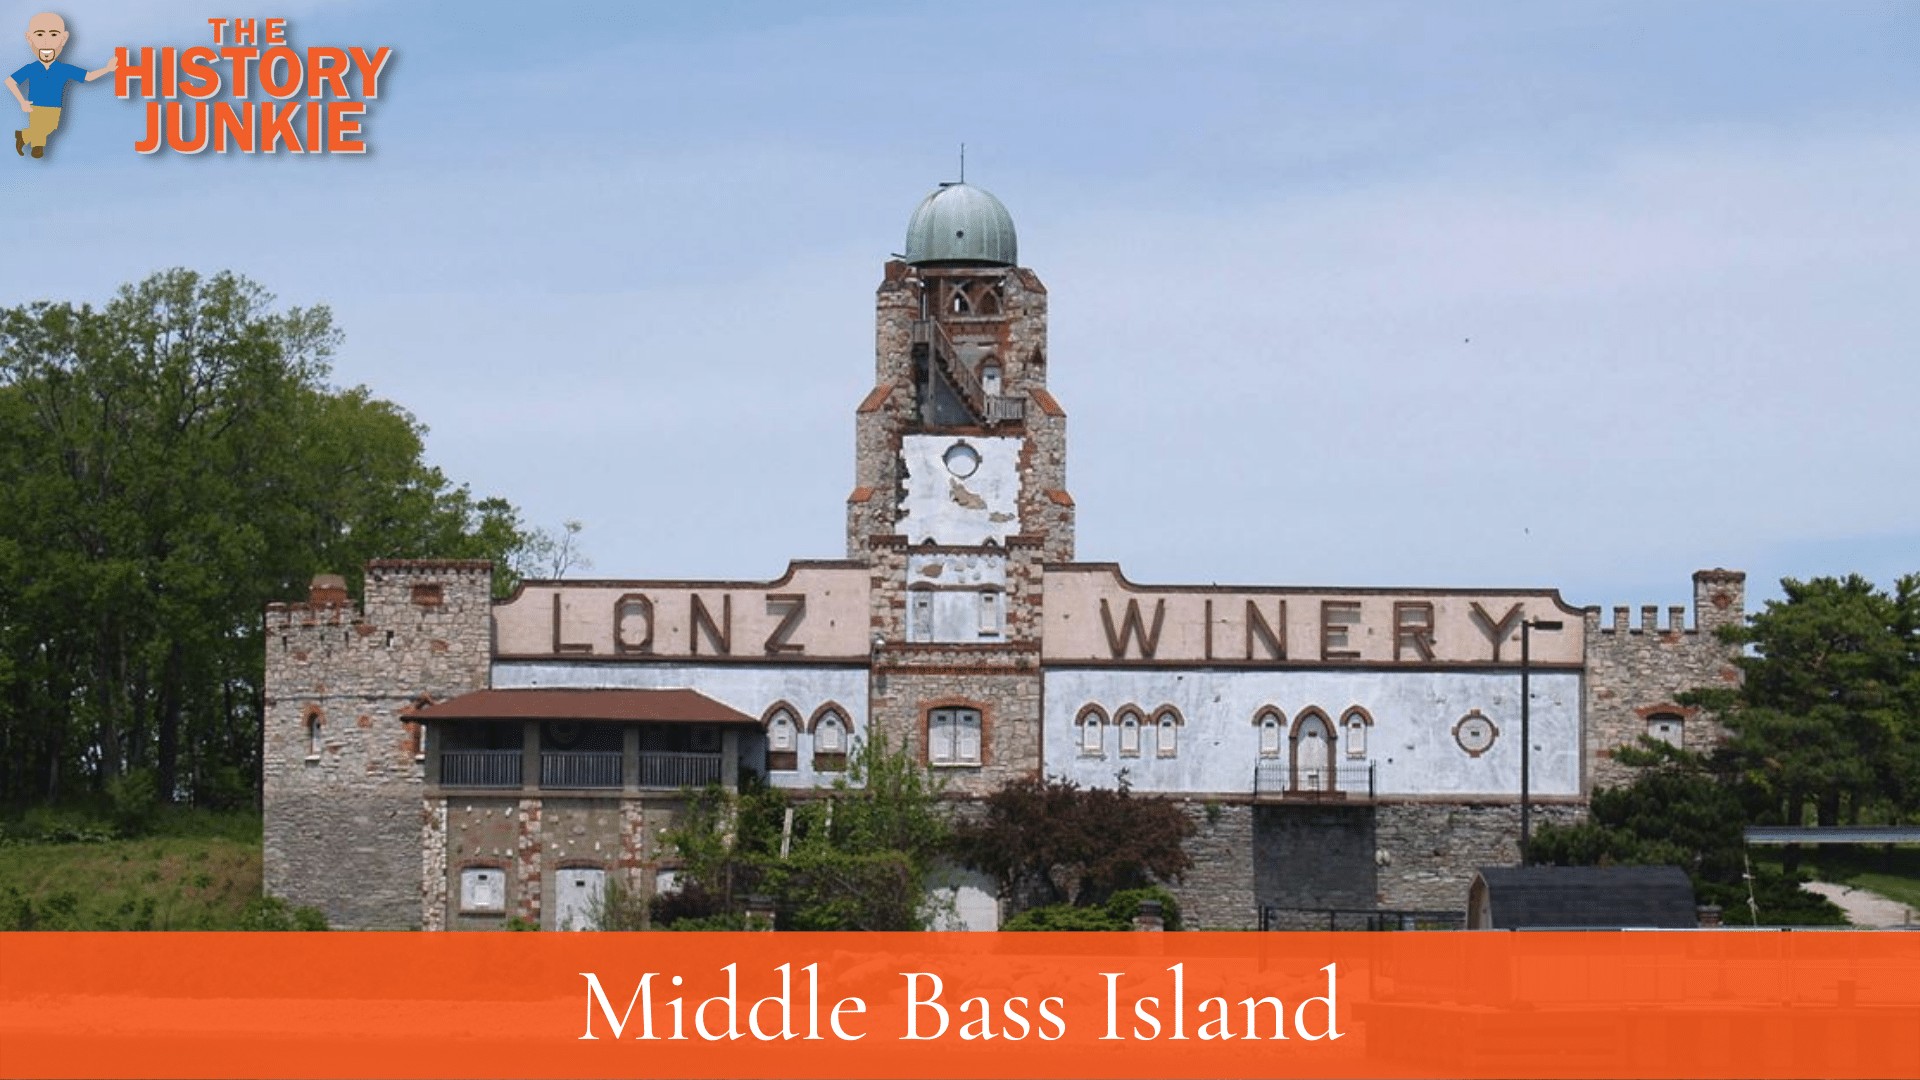 Middle Bass Island and the Lonz Winery